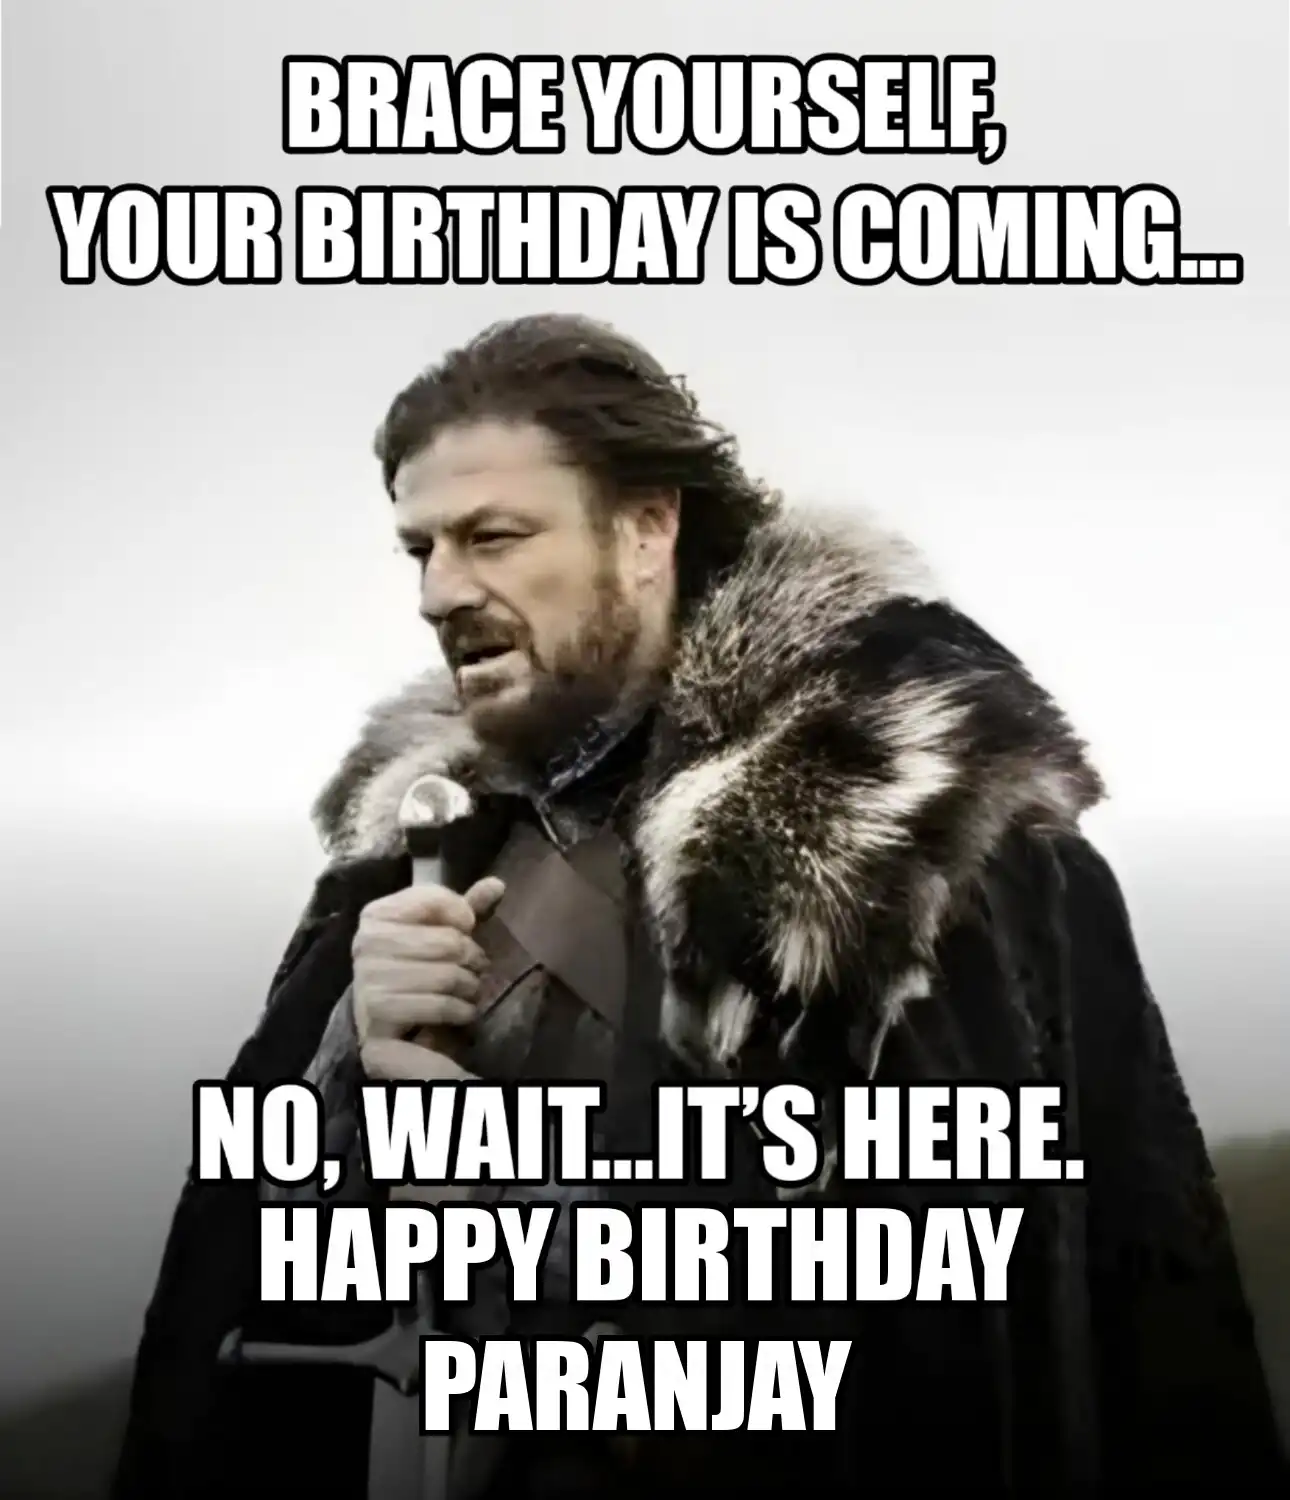 Happy Birthday Paranjay Brace Yourself Your Birthday Is Coming Meme